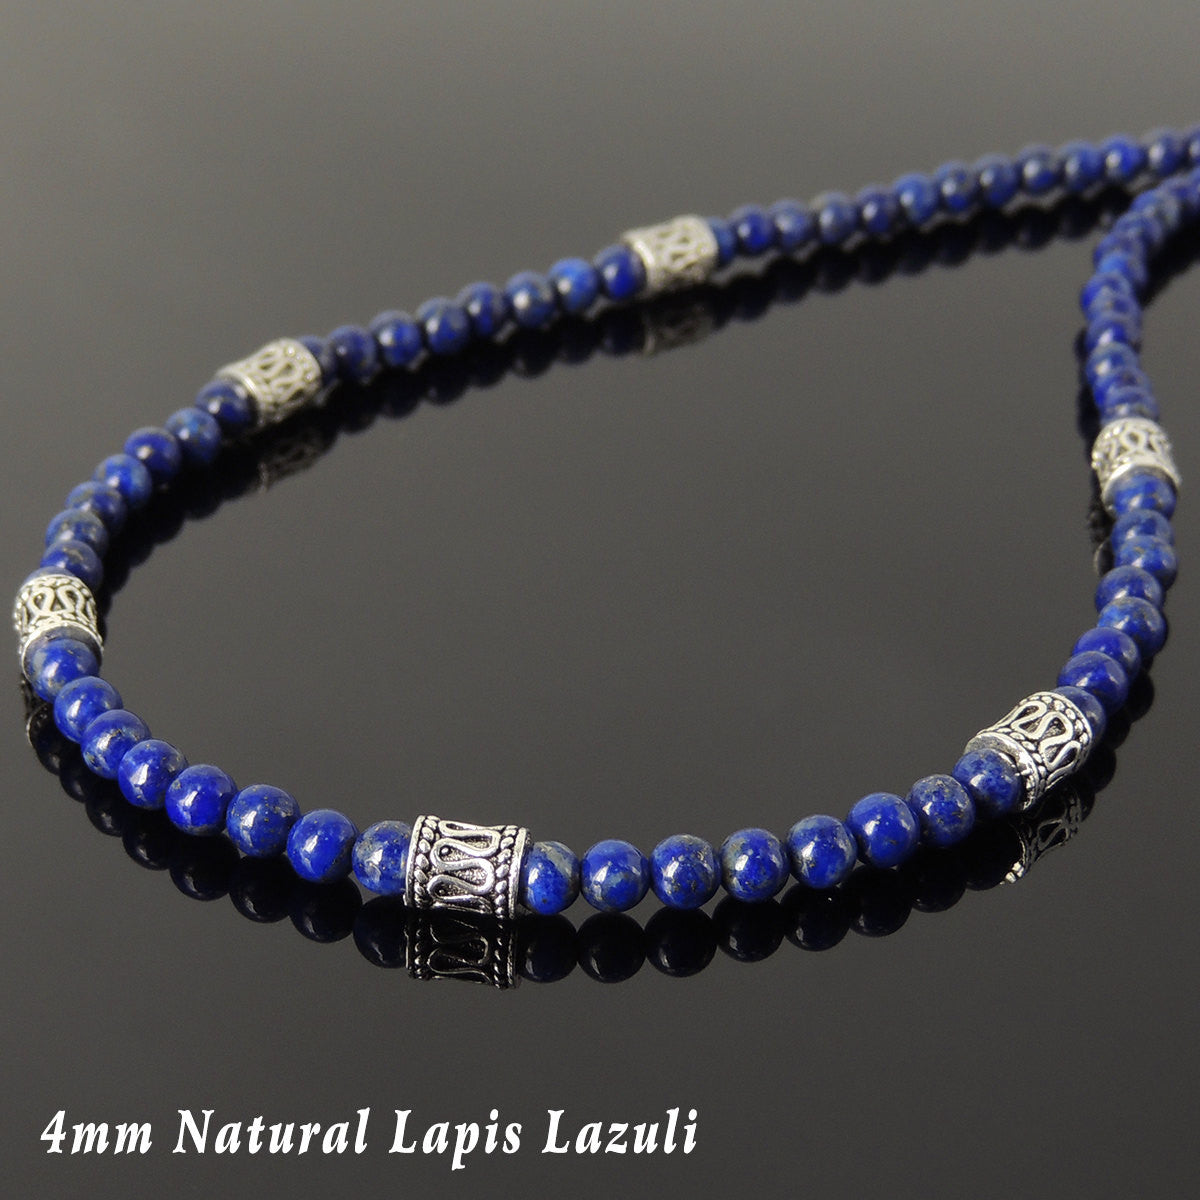 4mm Lapis Lazuli Healing Gemstone Necklace with S925 Sterling Silver Barrel Beads & Clasp - Handmade by Gem & Silver NK097